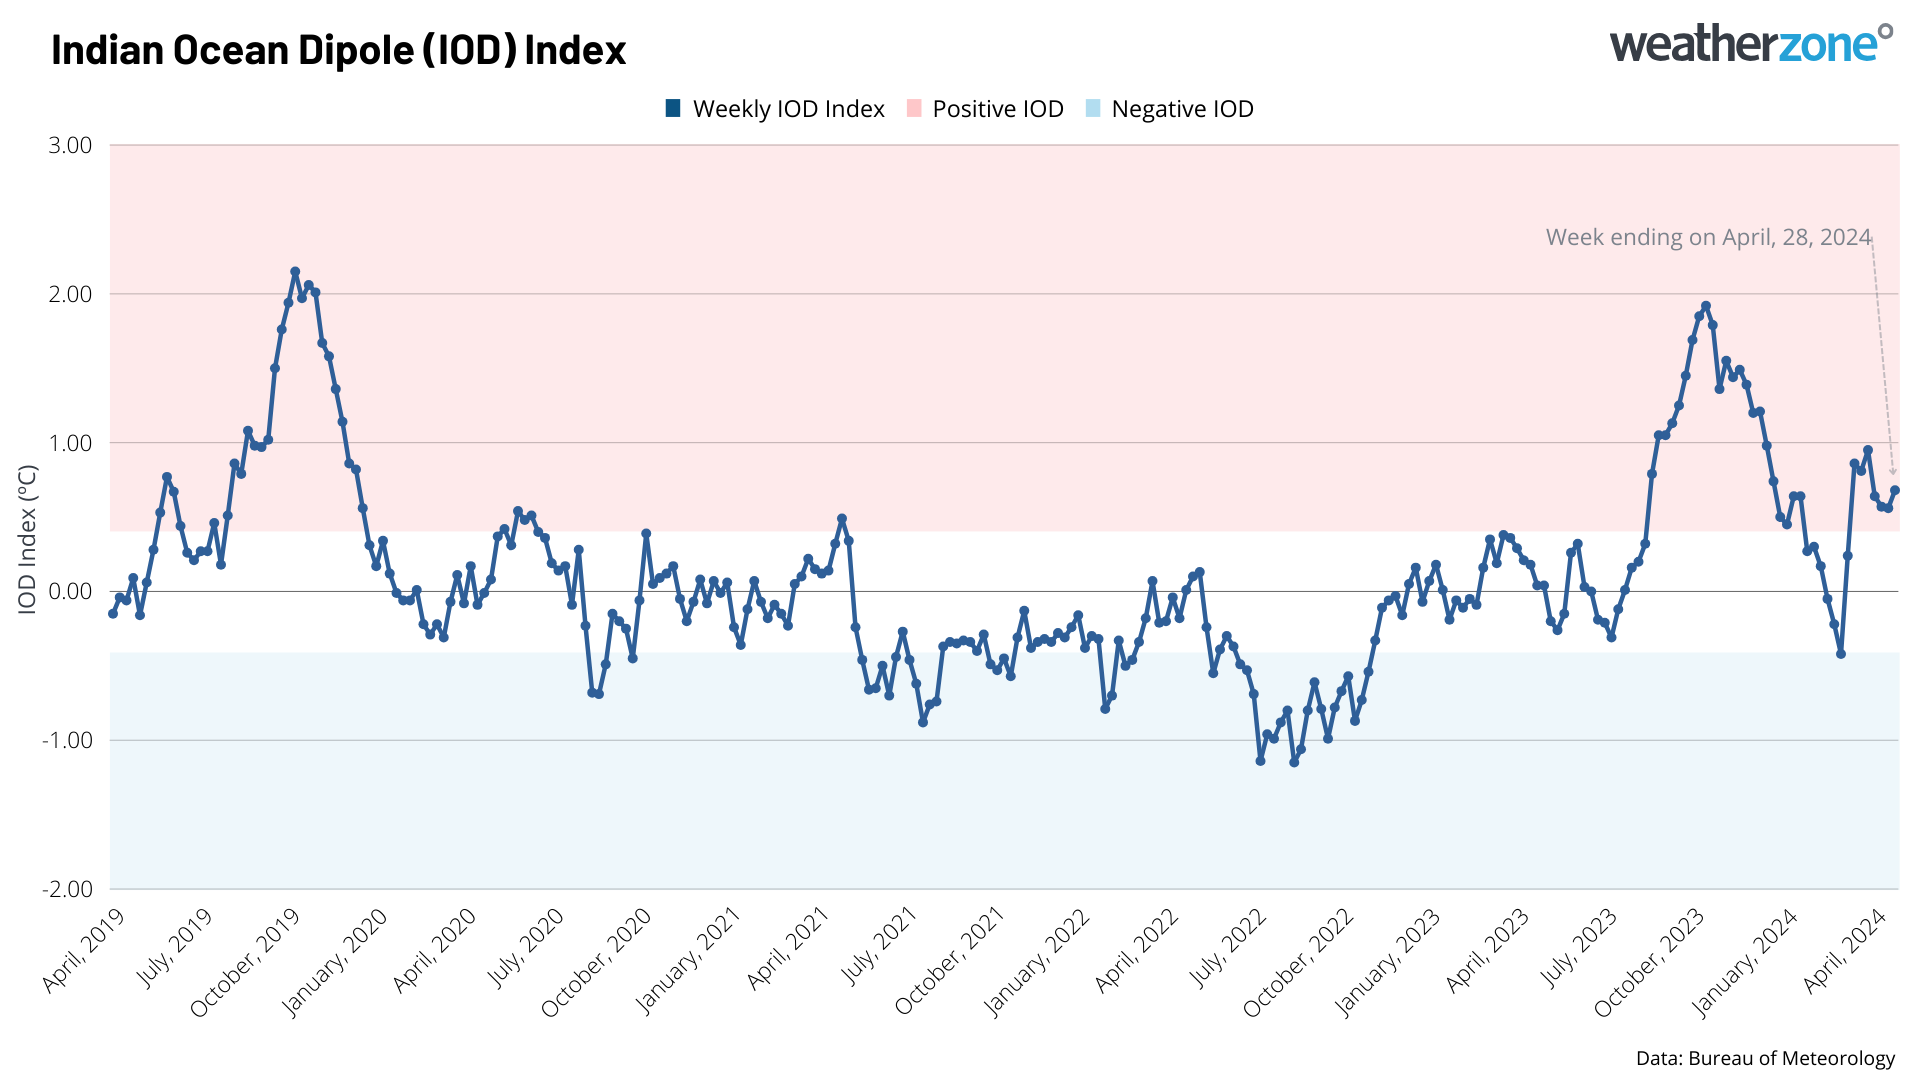 Weekly IOD Index since April 2019